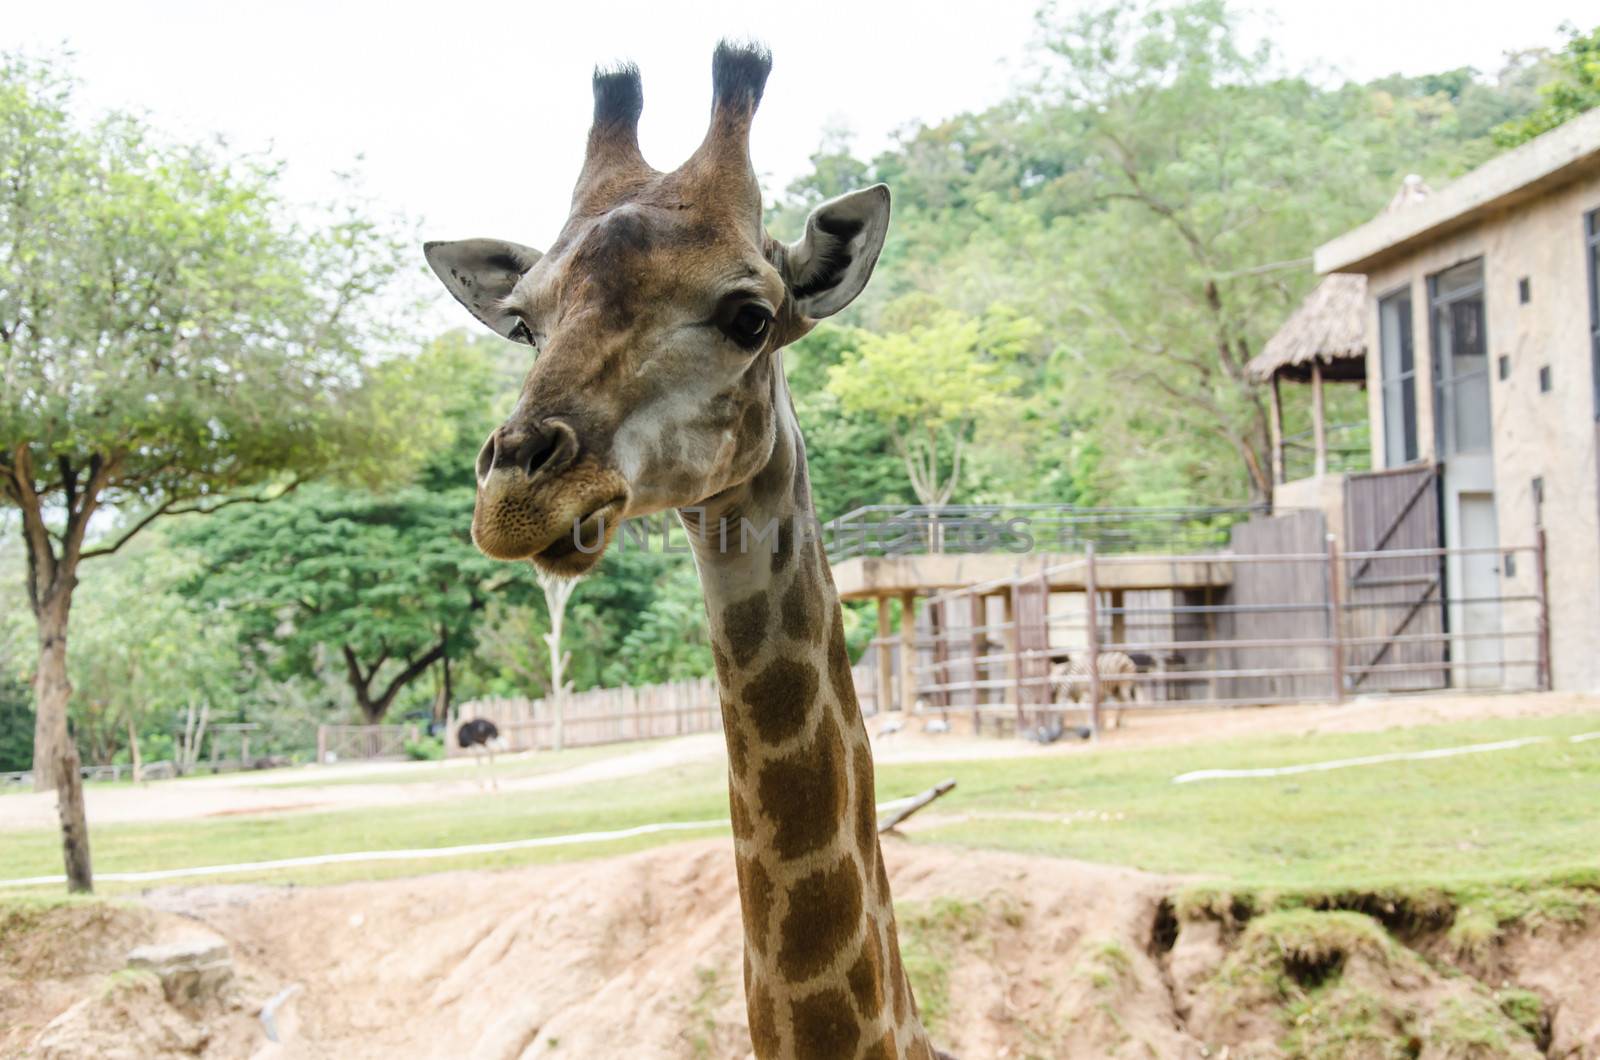 Long neck giraffe is the animal most like to eat vegetables.